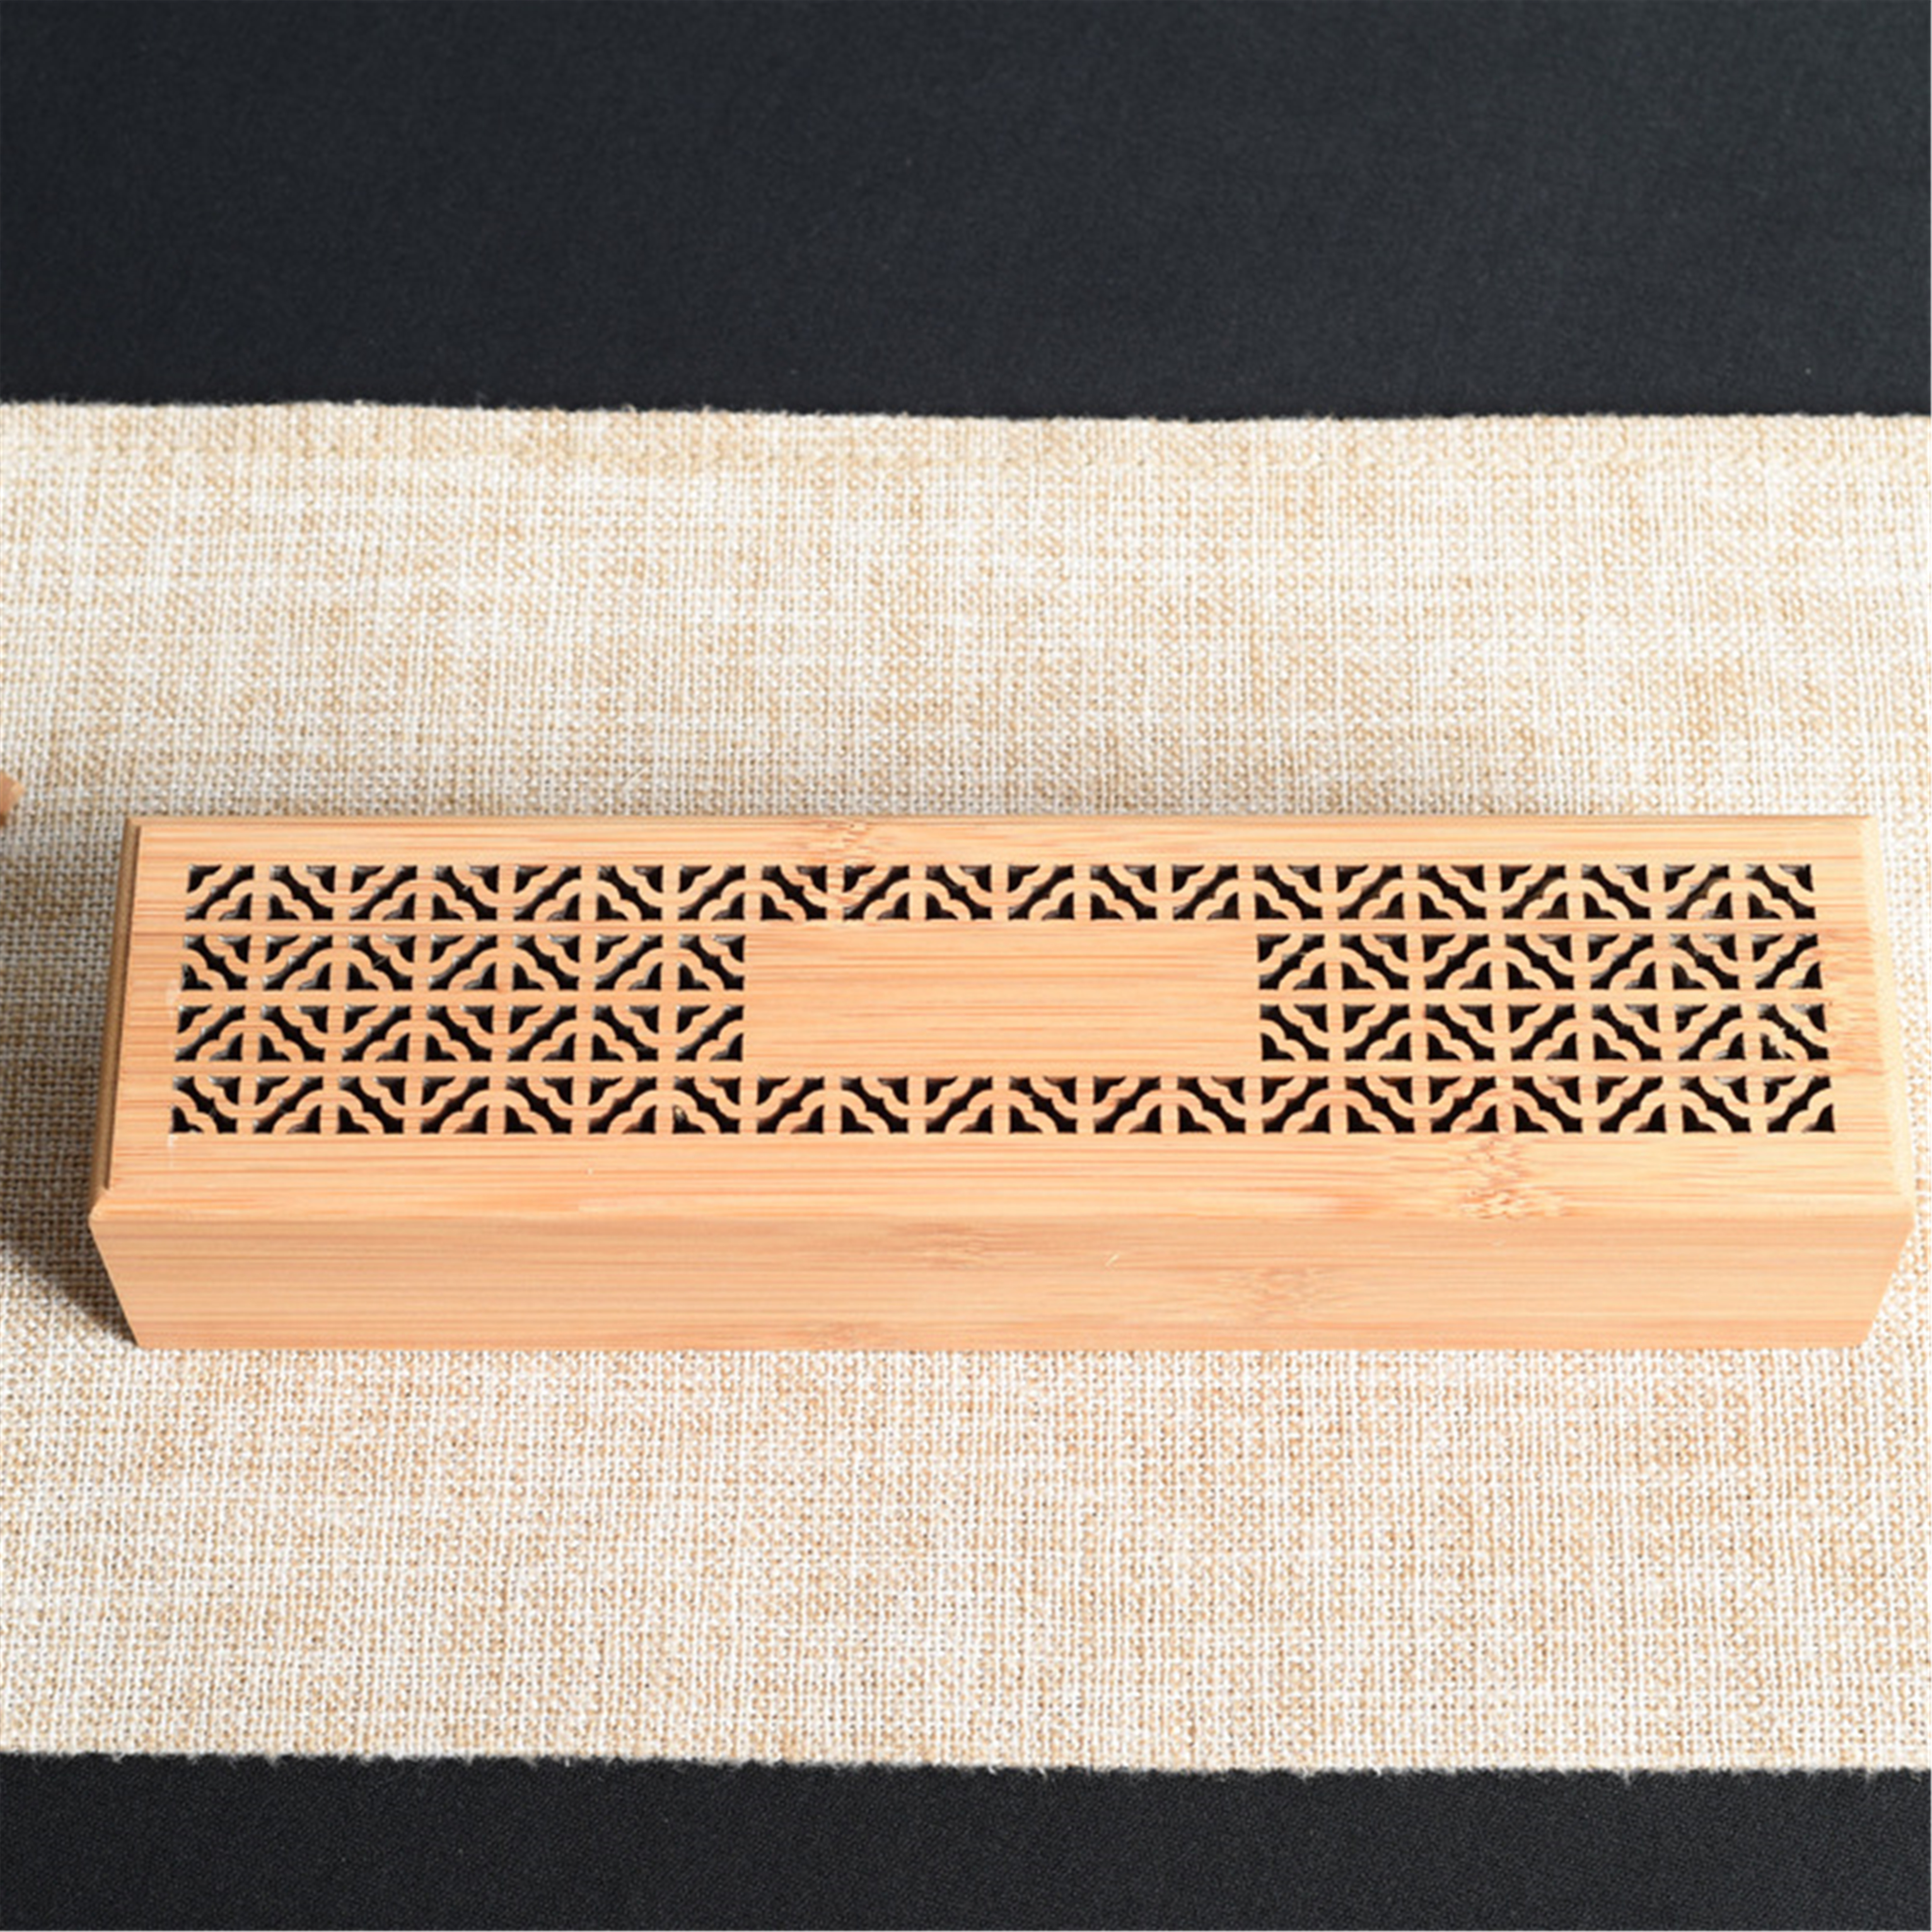 Bamboo and wood thread incense box Home indoor Zen sleeping incense box Aromatherapy stove Bamboo and wood hollow incense holder base